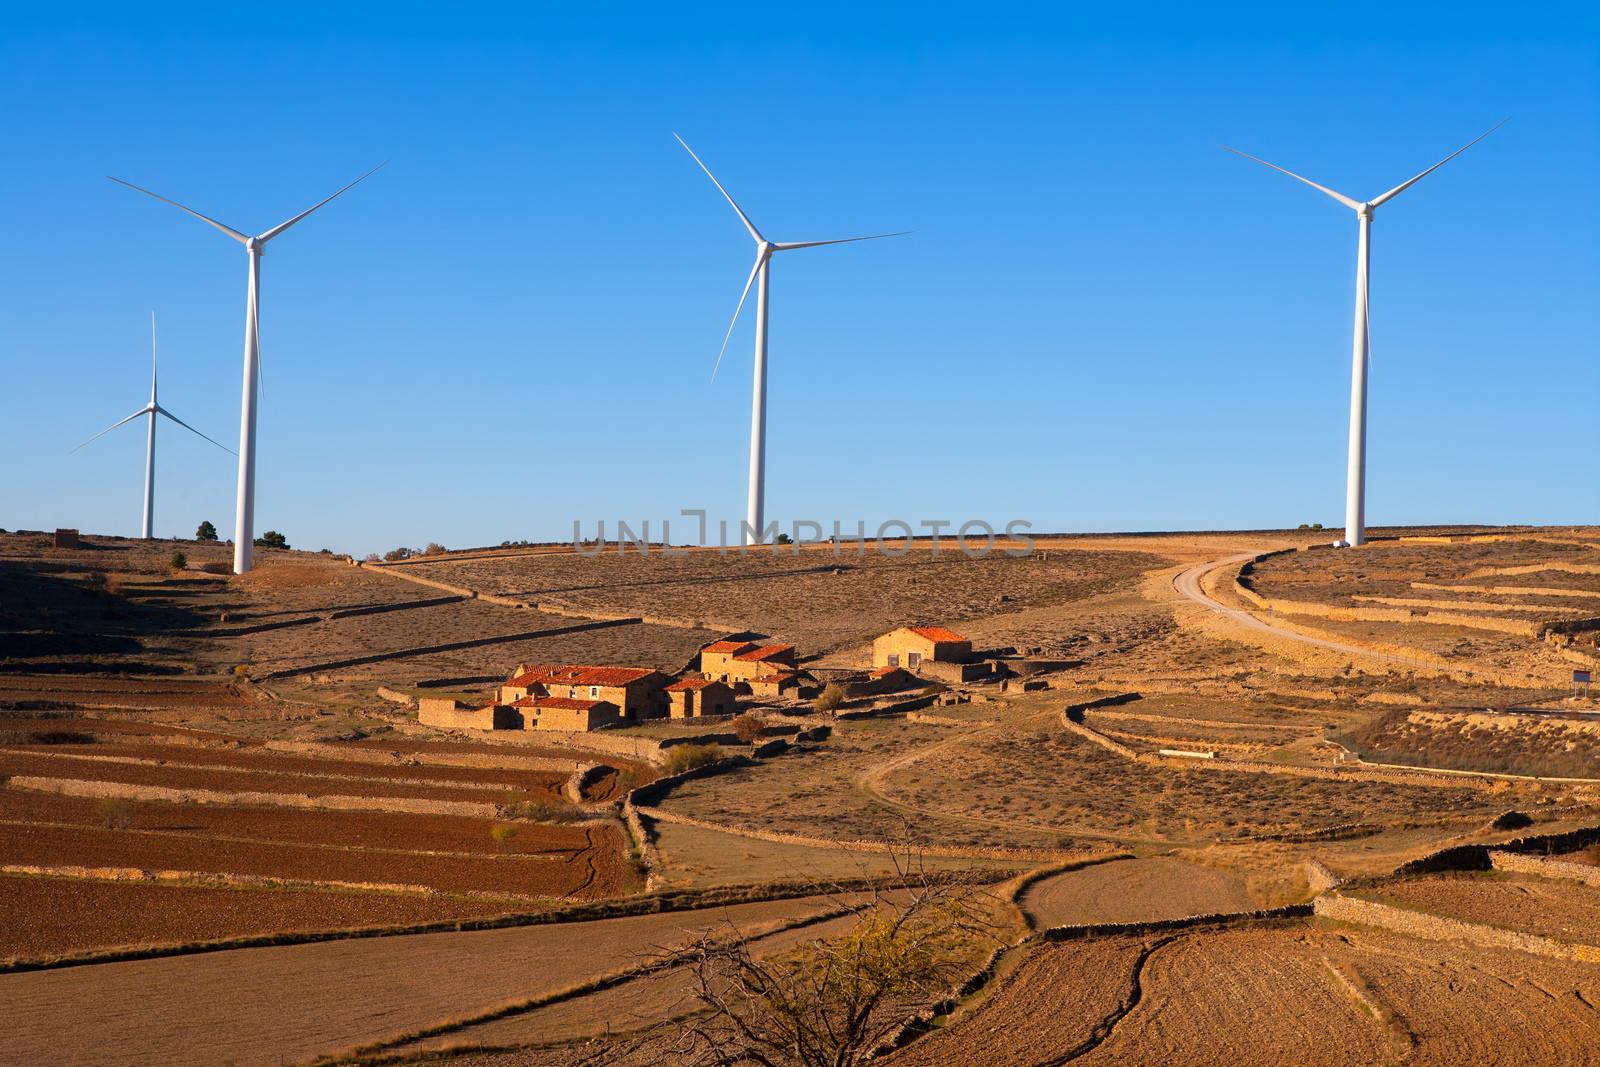 Maestrazgo in Castellon Windmills with traditional rural life at spain